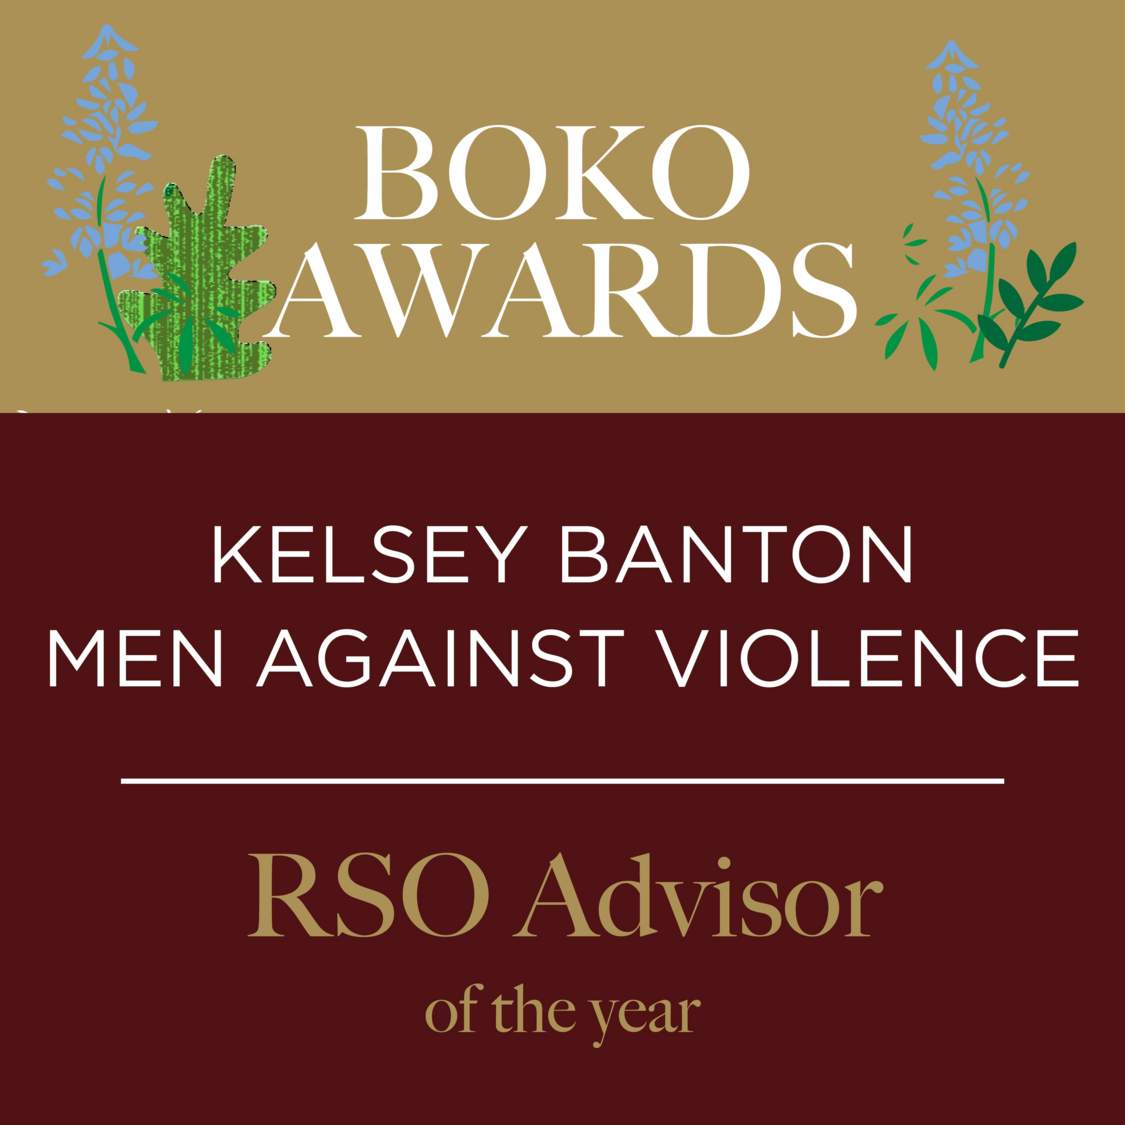 Picture of text displaying that Kelsey Banton won the RSO Advisor of the Year award.